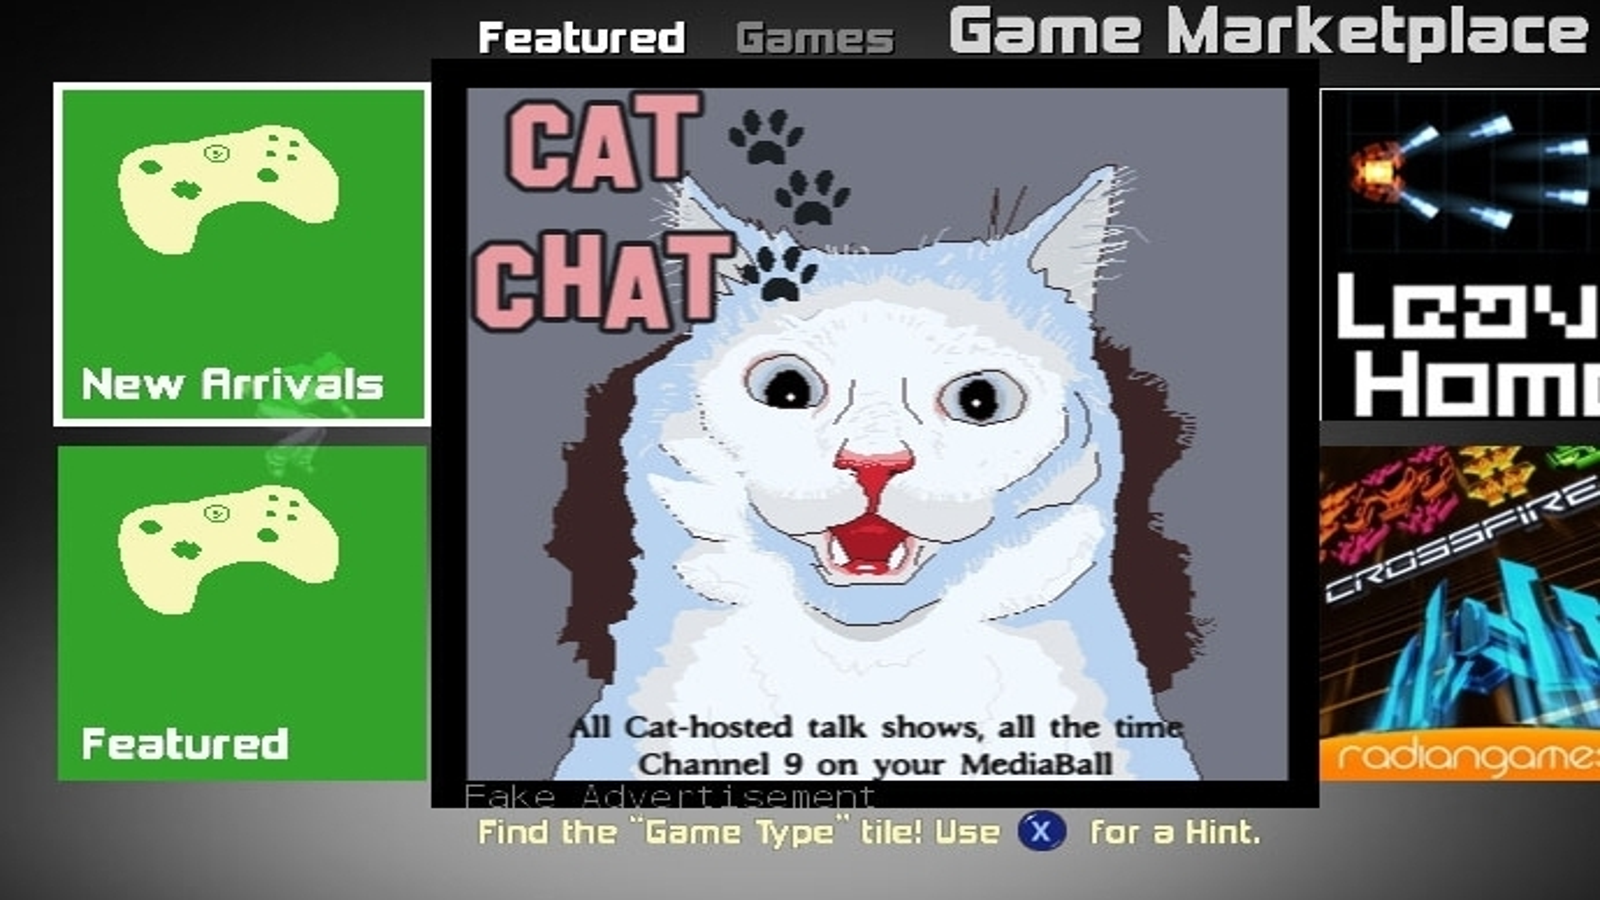 1up shows that video game websites certainly trend to either a